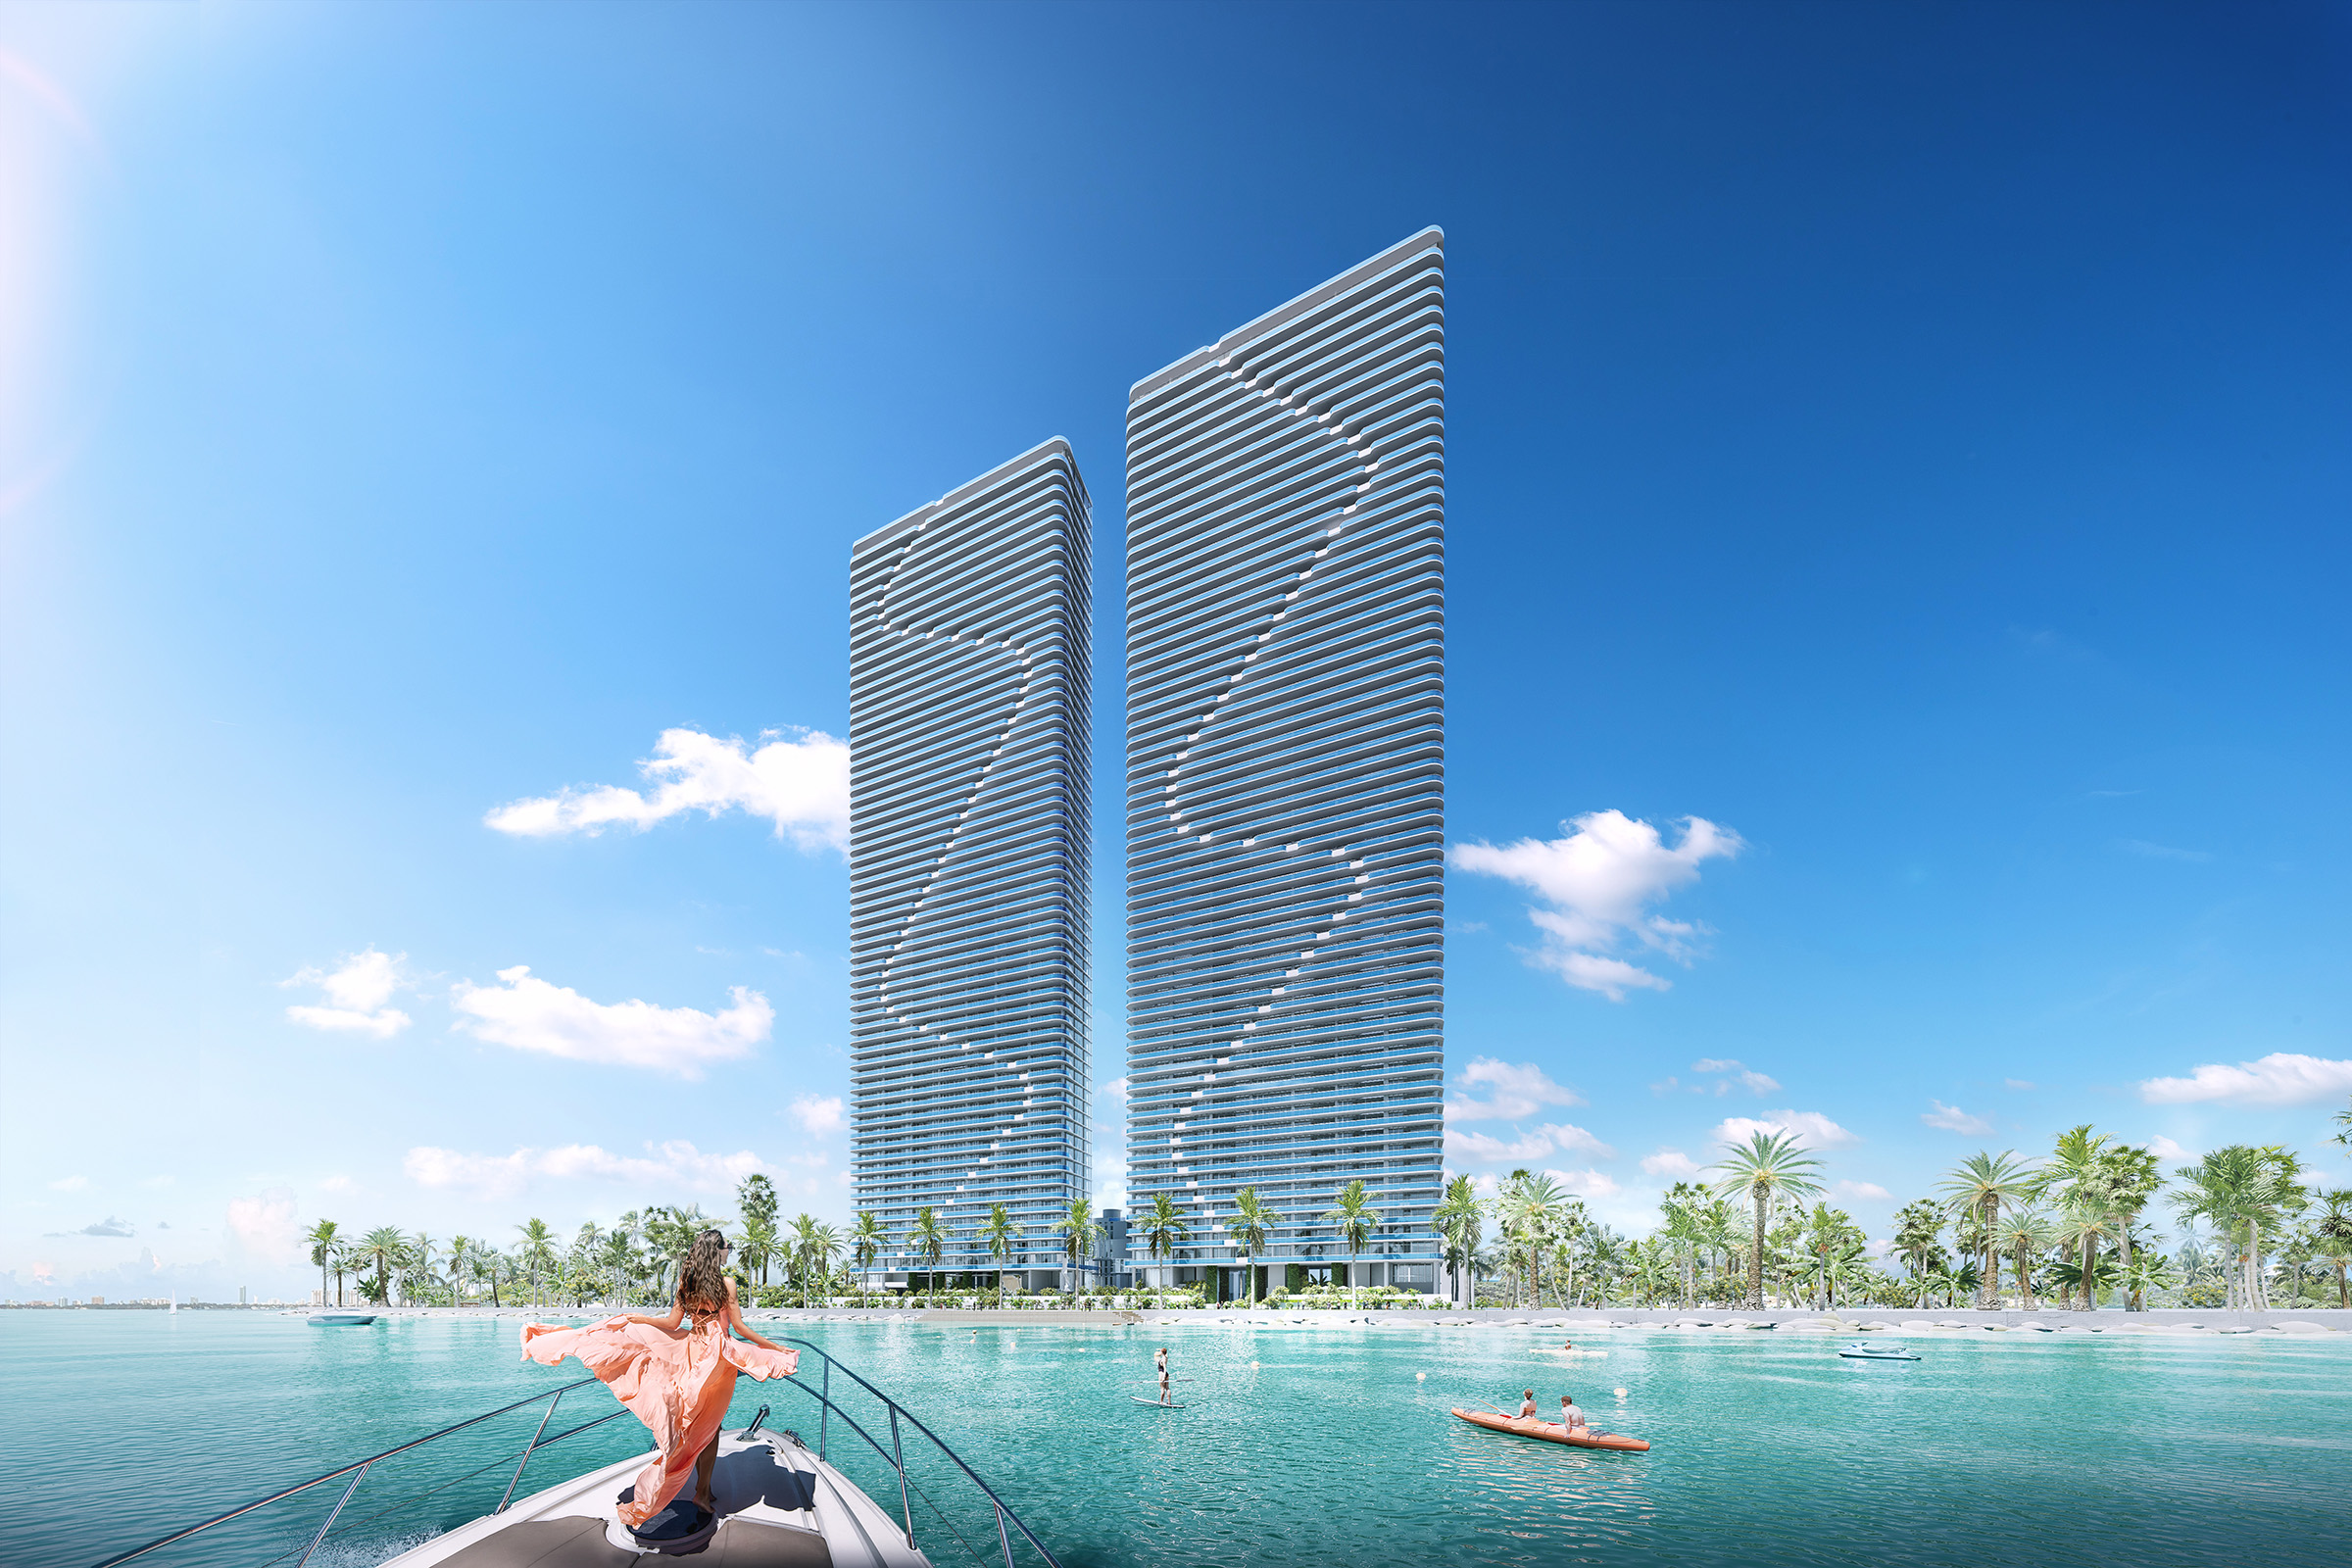 Aria Reserve is a 62-story twin tower condo project located in the bayfront neighborhood of Edgewater in Miami, Florida.